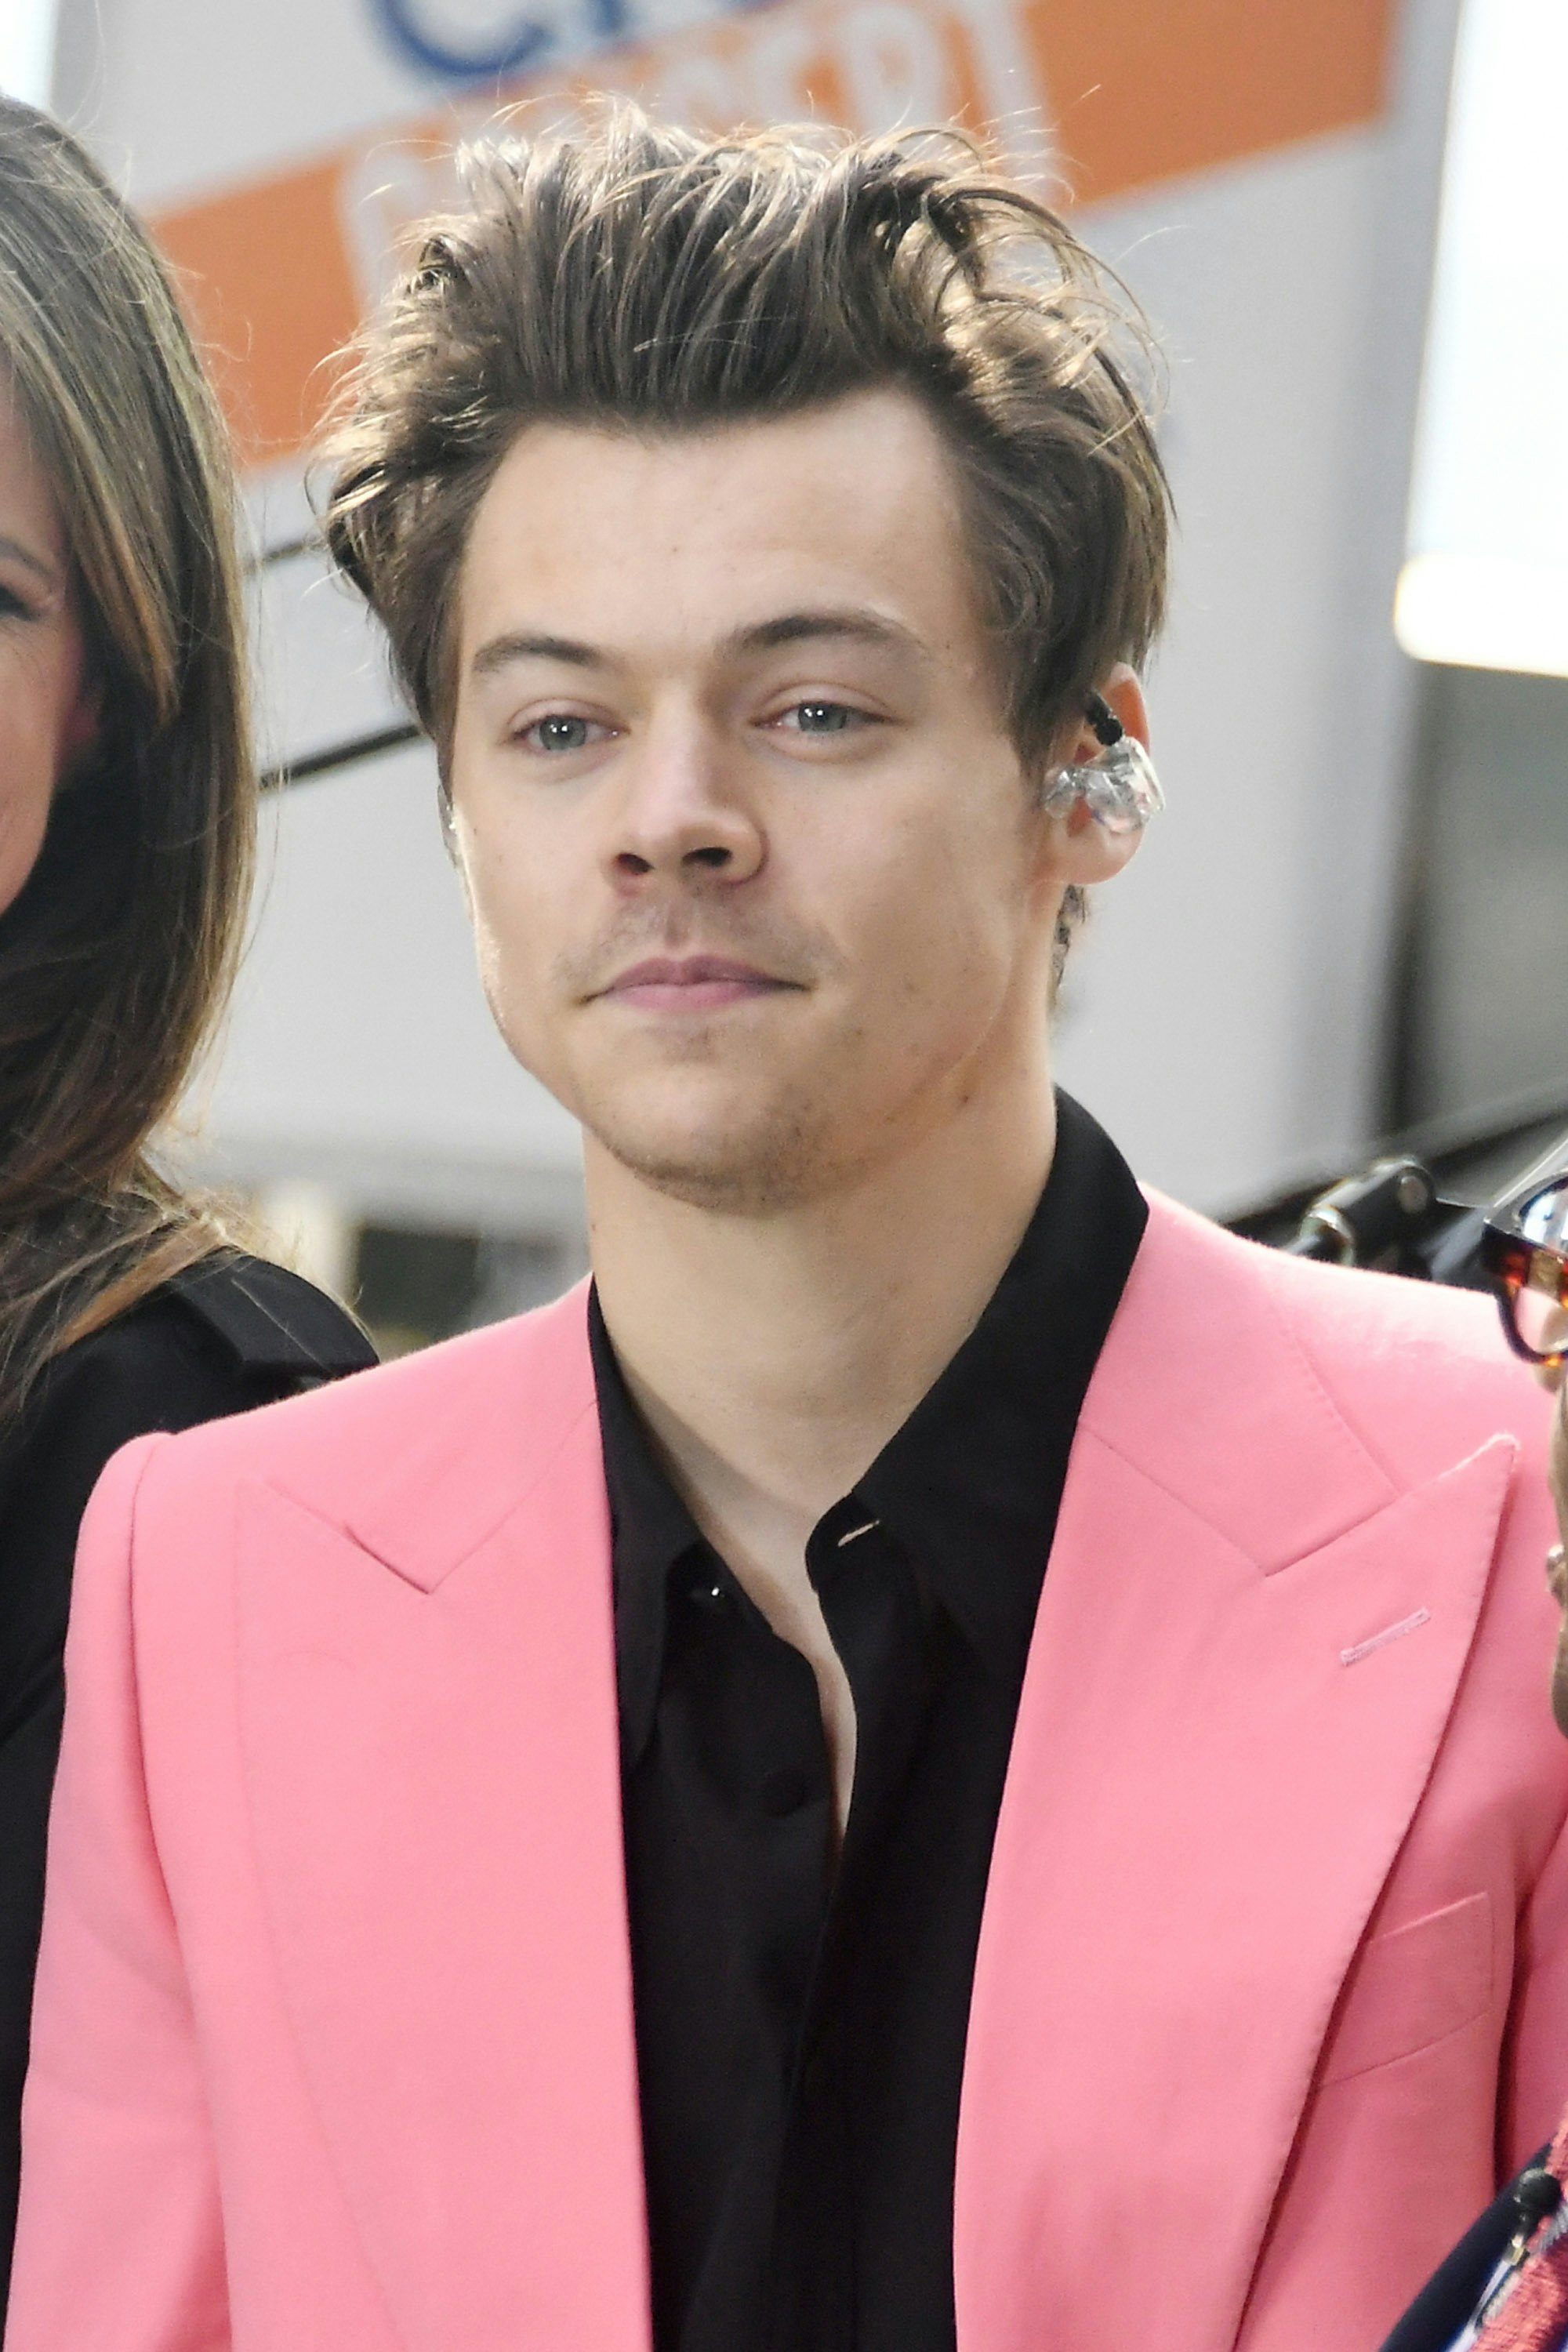 Footage Of Harry Styles Haircut Now Exists The Internet Is